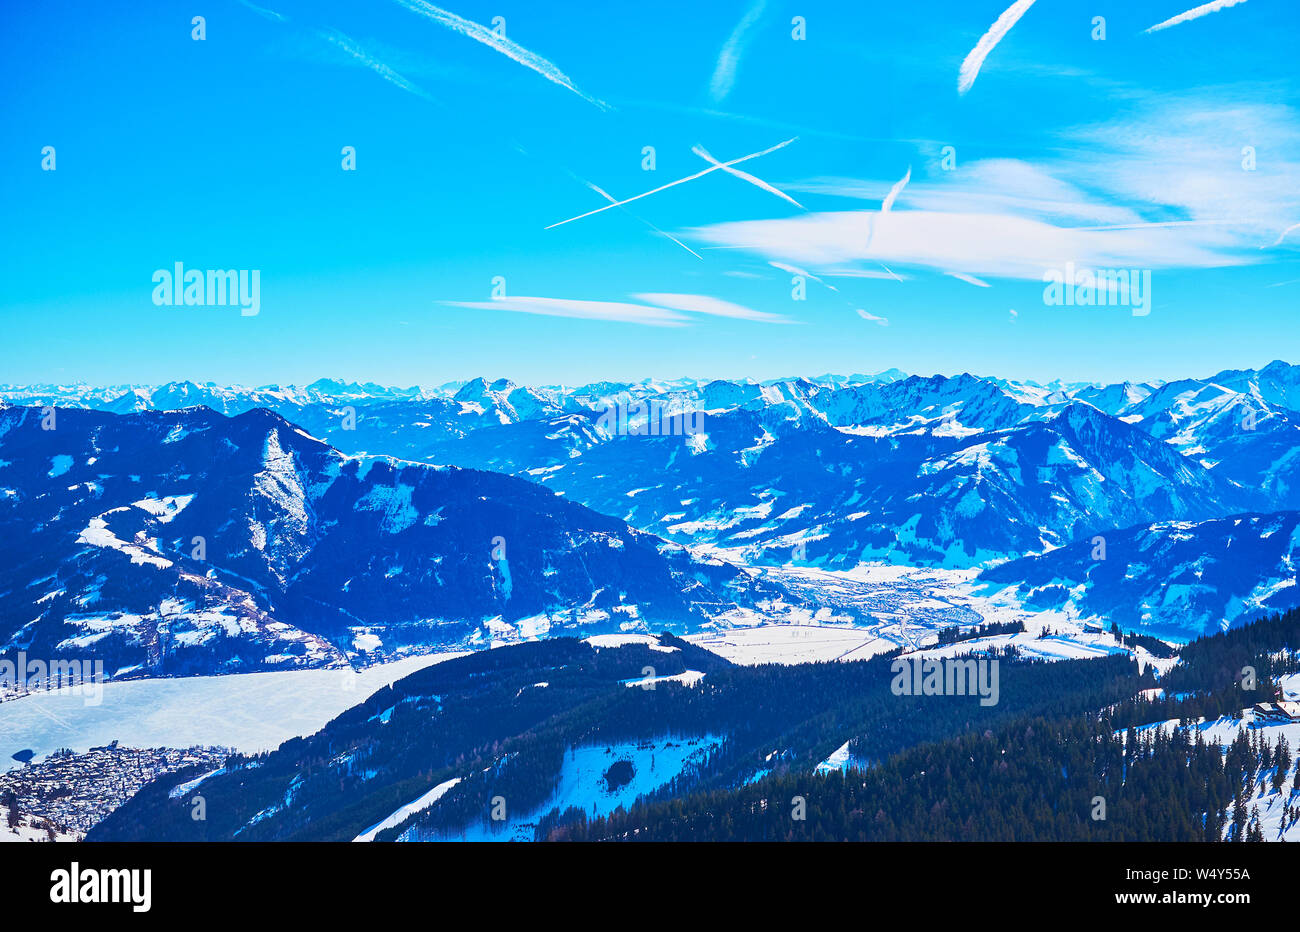 The light blue haze covers the sharp Alpine peaks and snowy slopes, seen from the peak of Schmittenhohe mount, Zell am See, Austria Stock Photo